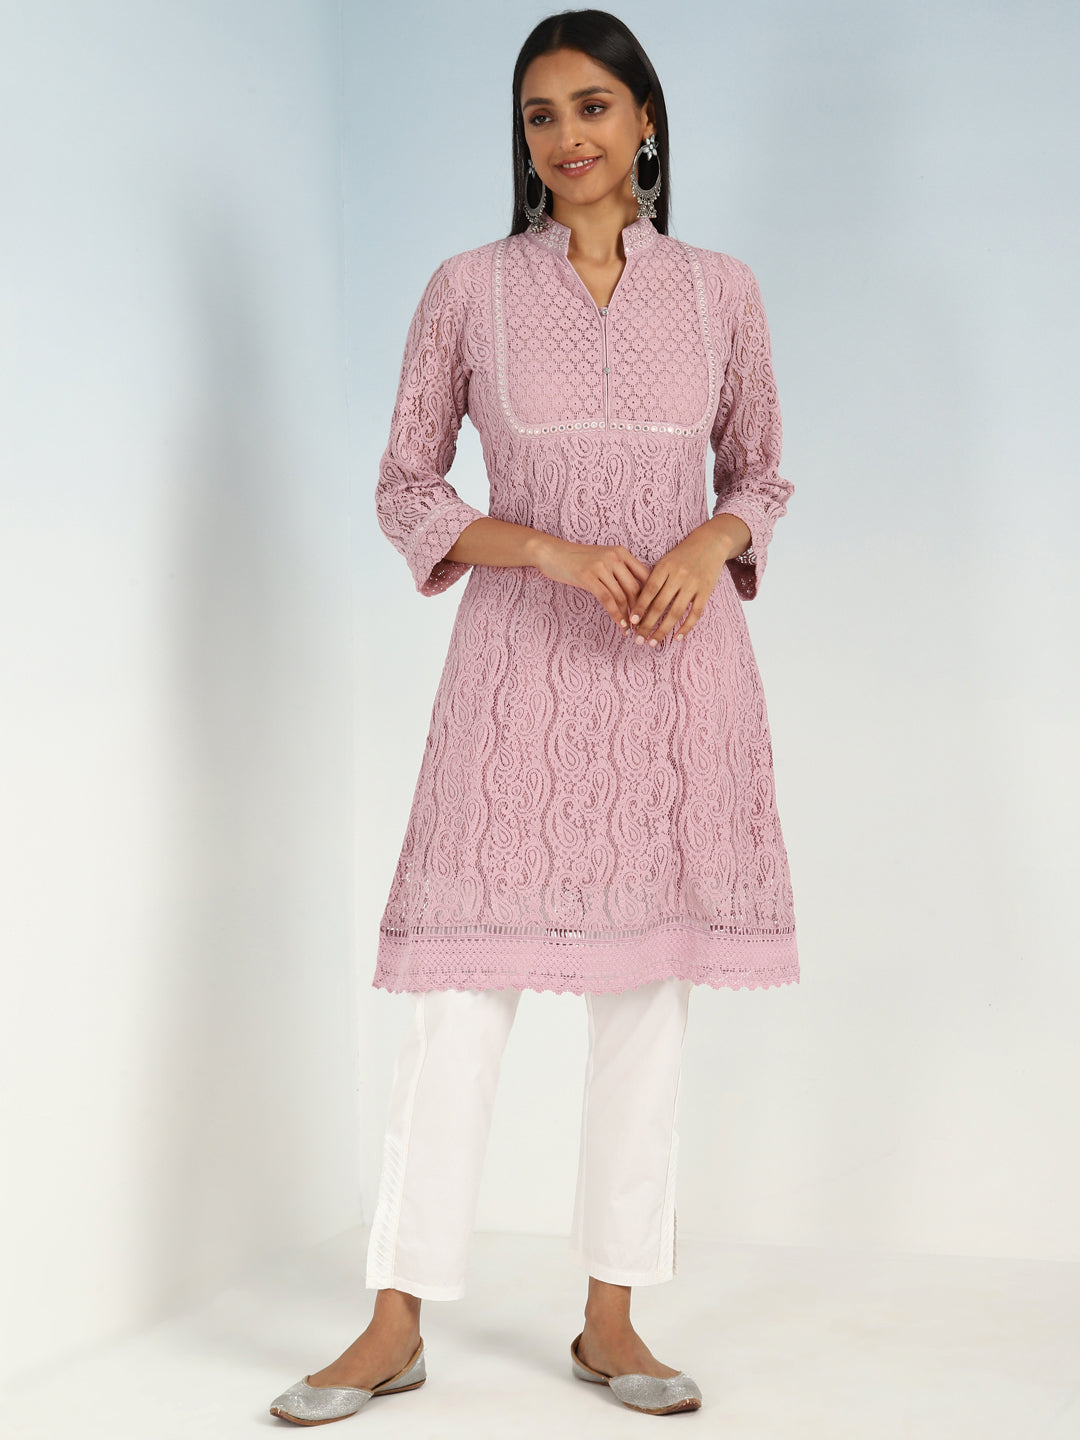 Ladies Cotton Embroidered Kurti, Casual Wear at Rs 699/piece in Jaipur |  ID: 2848975826930